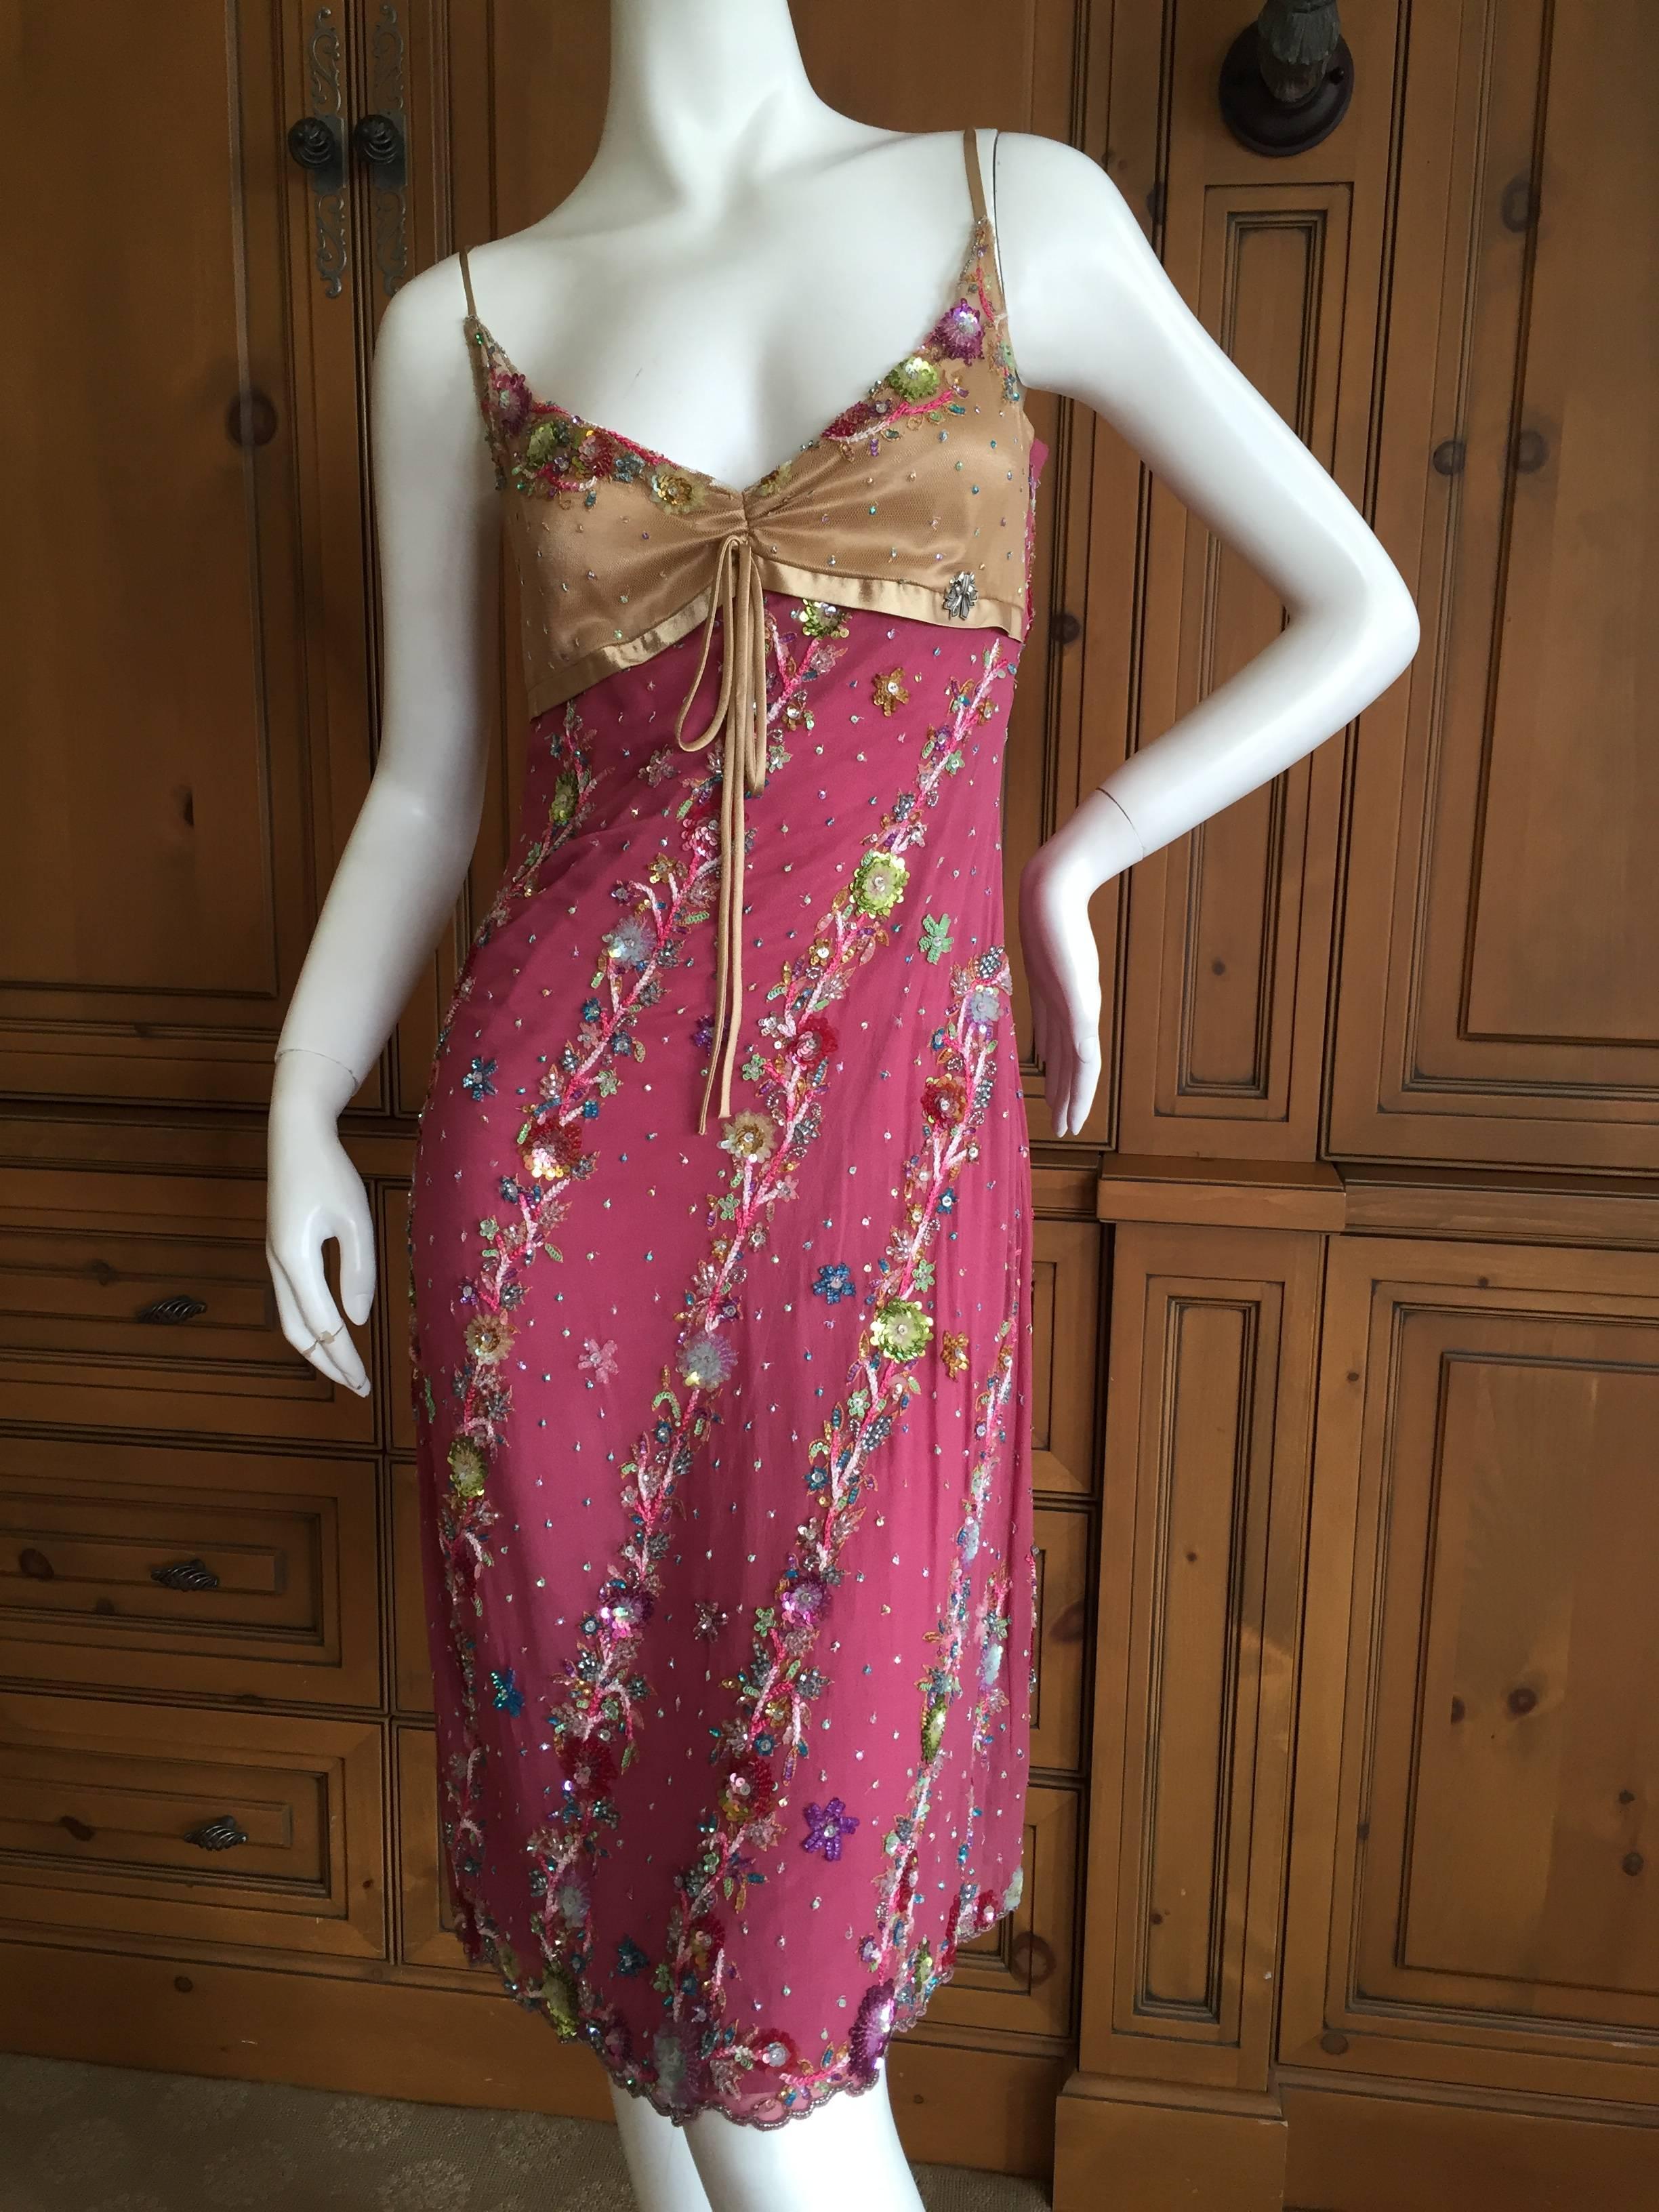 John Galliano Enchanting Mini Dress with Floral Sequin Details.
This is so sweet , please use the zoom feature to see all the great details.
NWT, unworn
Size 40

Bust 36